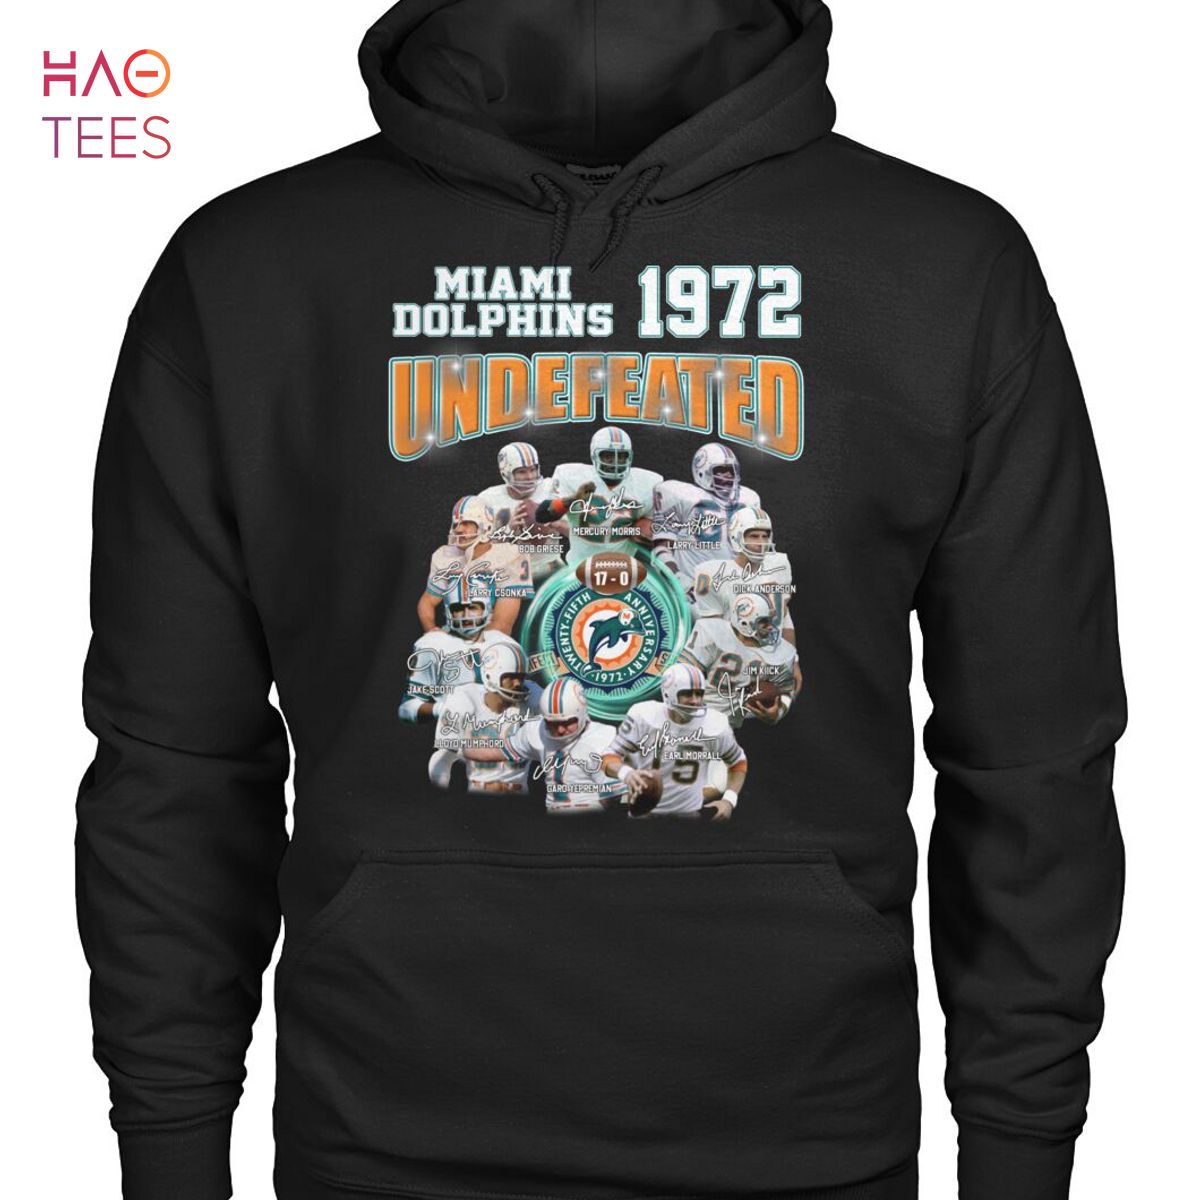 Miami Dolphins 1972 Underfeated T Shirt Limited Edition